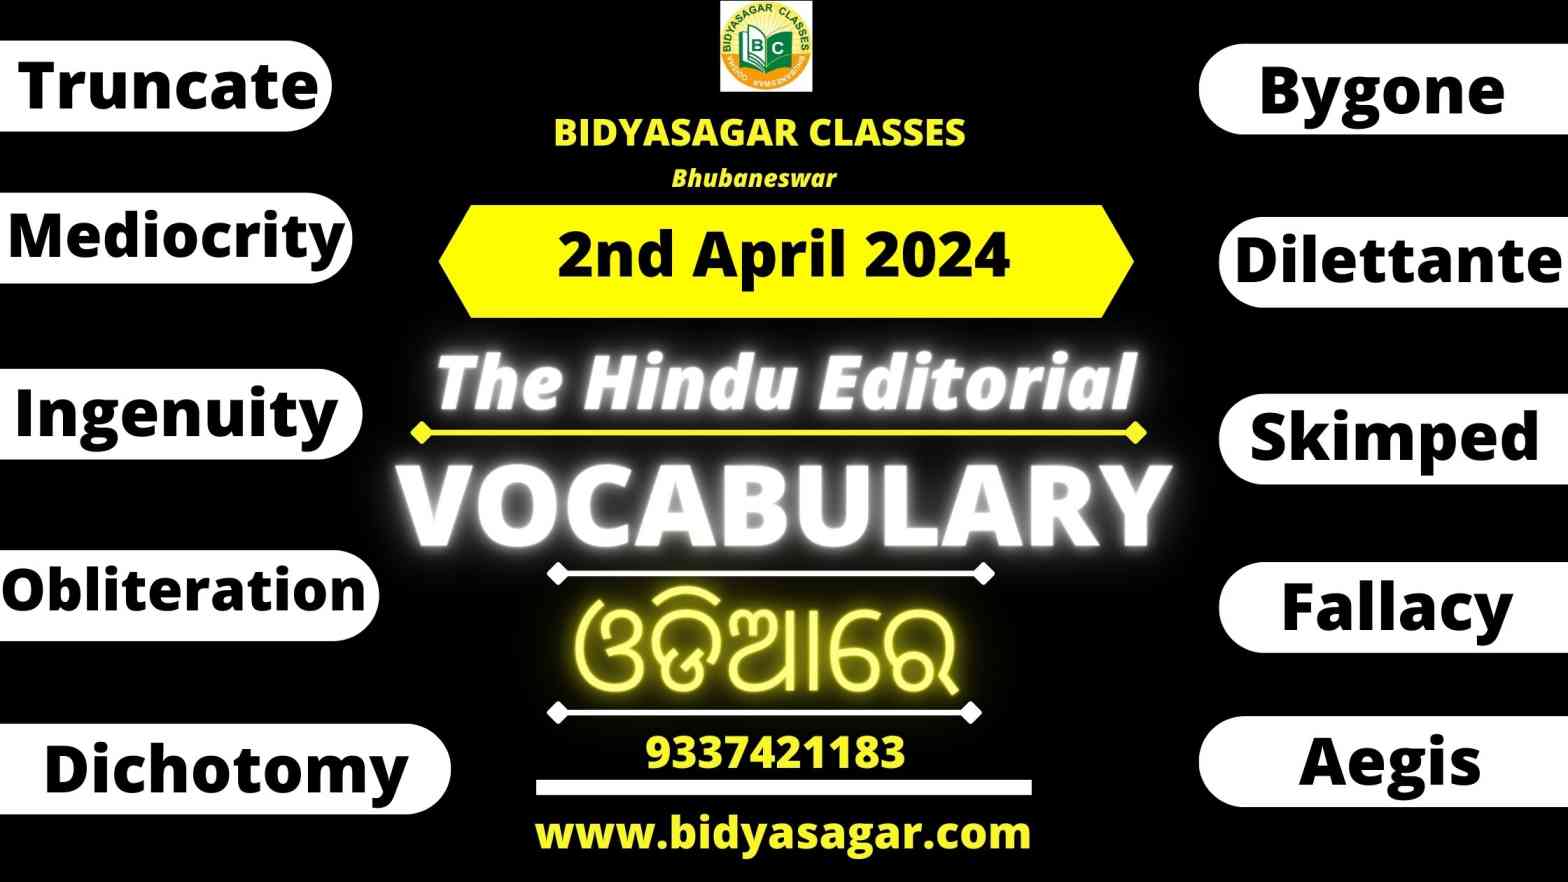 The Hindu Editorial Vocabulary of 2nd April 2024